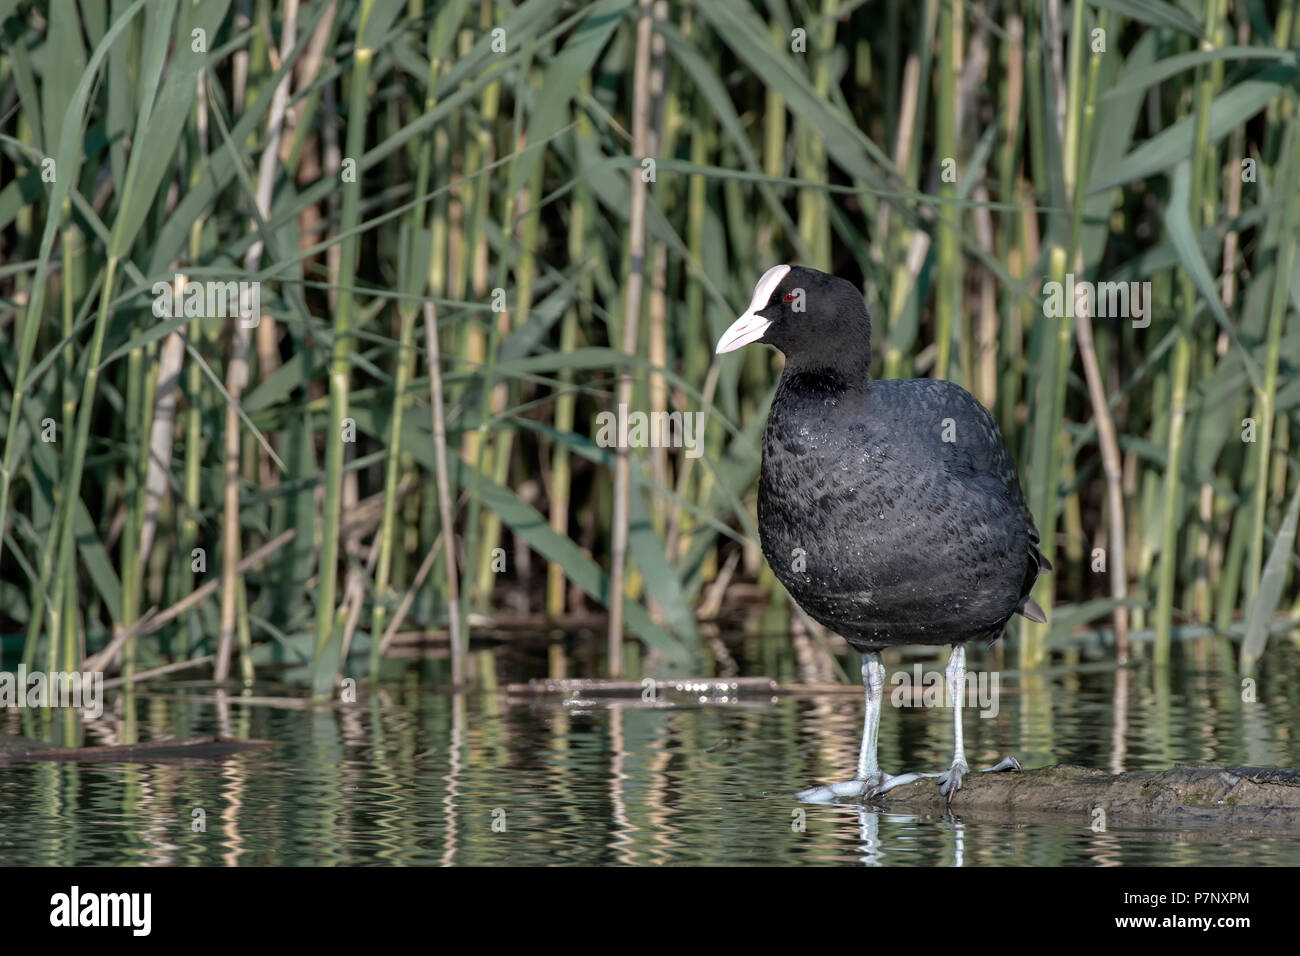 Common coot (Fulica atra) standing on a driftwood in the water, Lake Constance, Vorarlberg, Austria Stock Photo